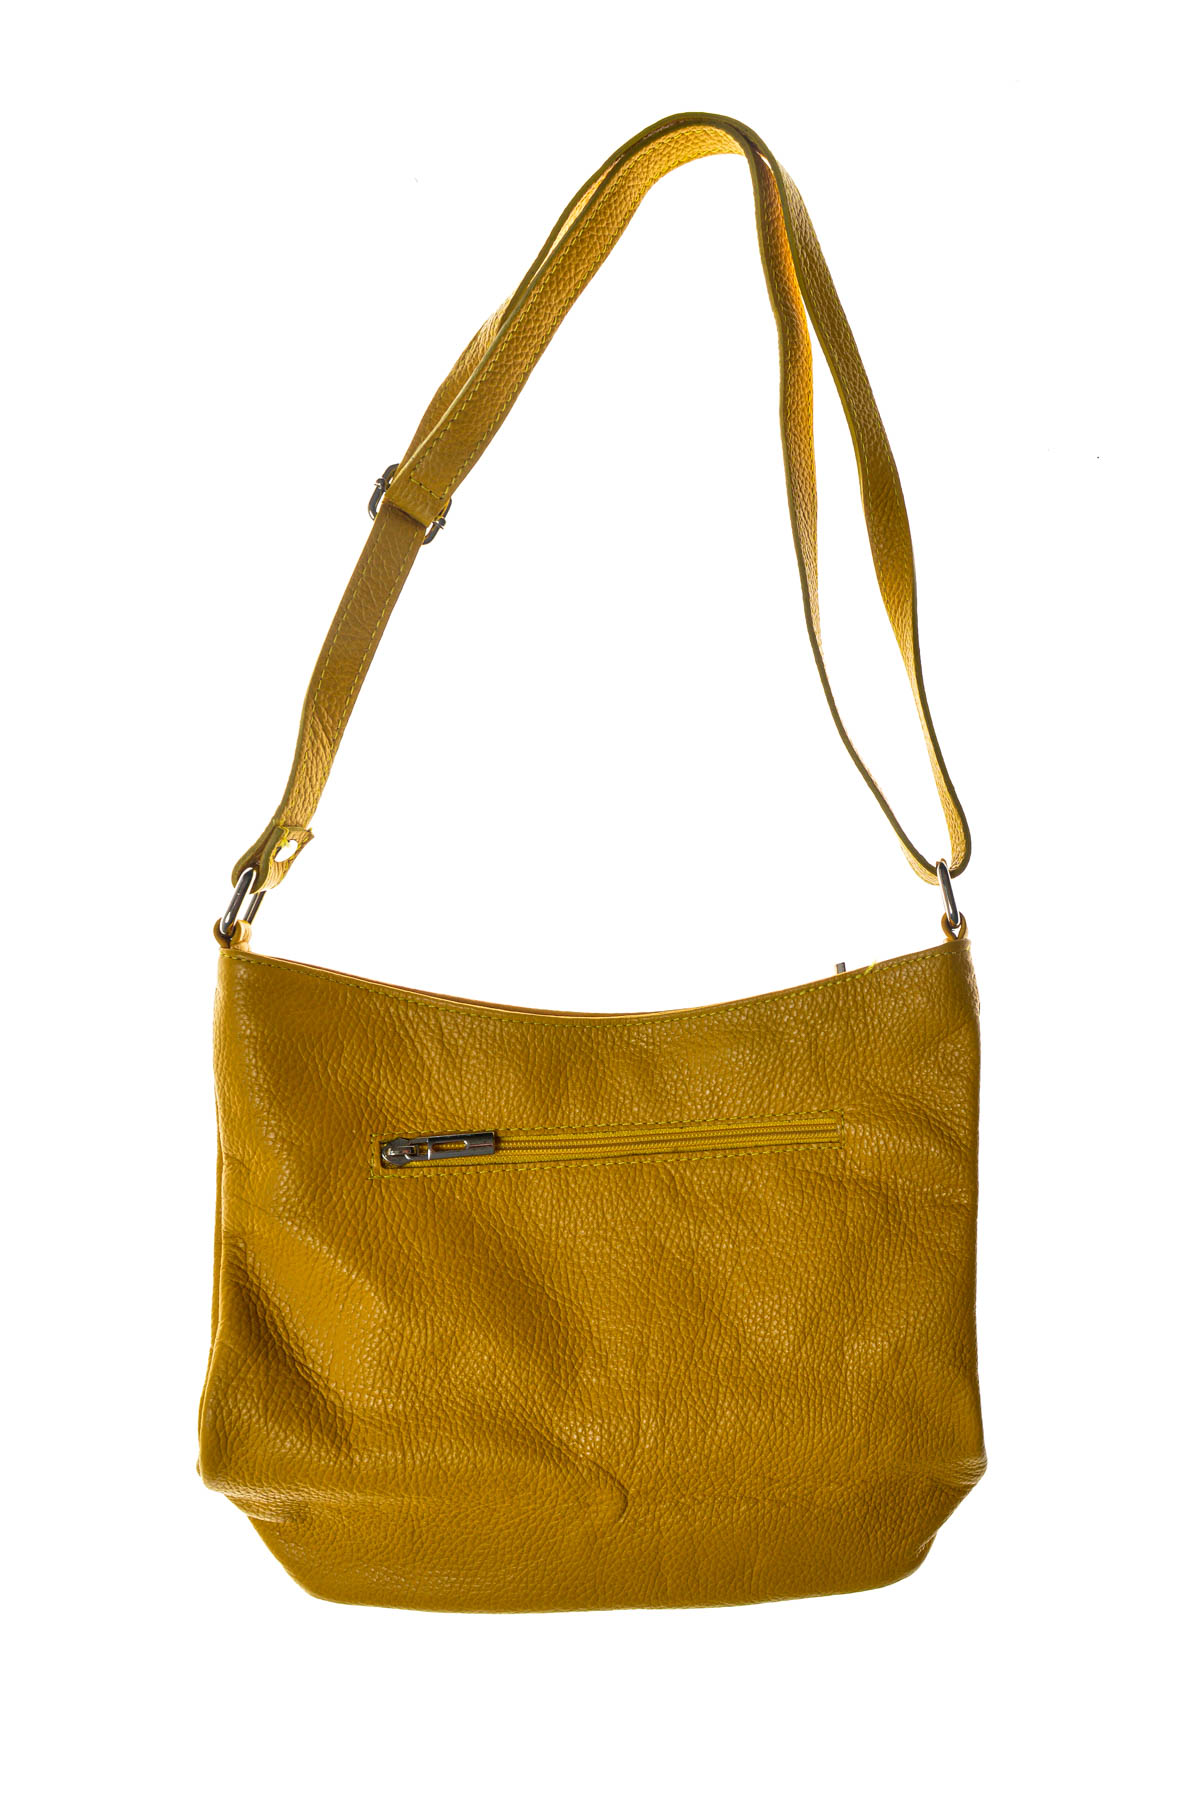 Women's bag - Made in Italy - 1